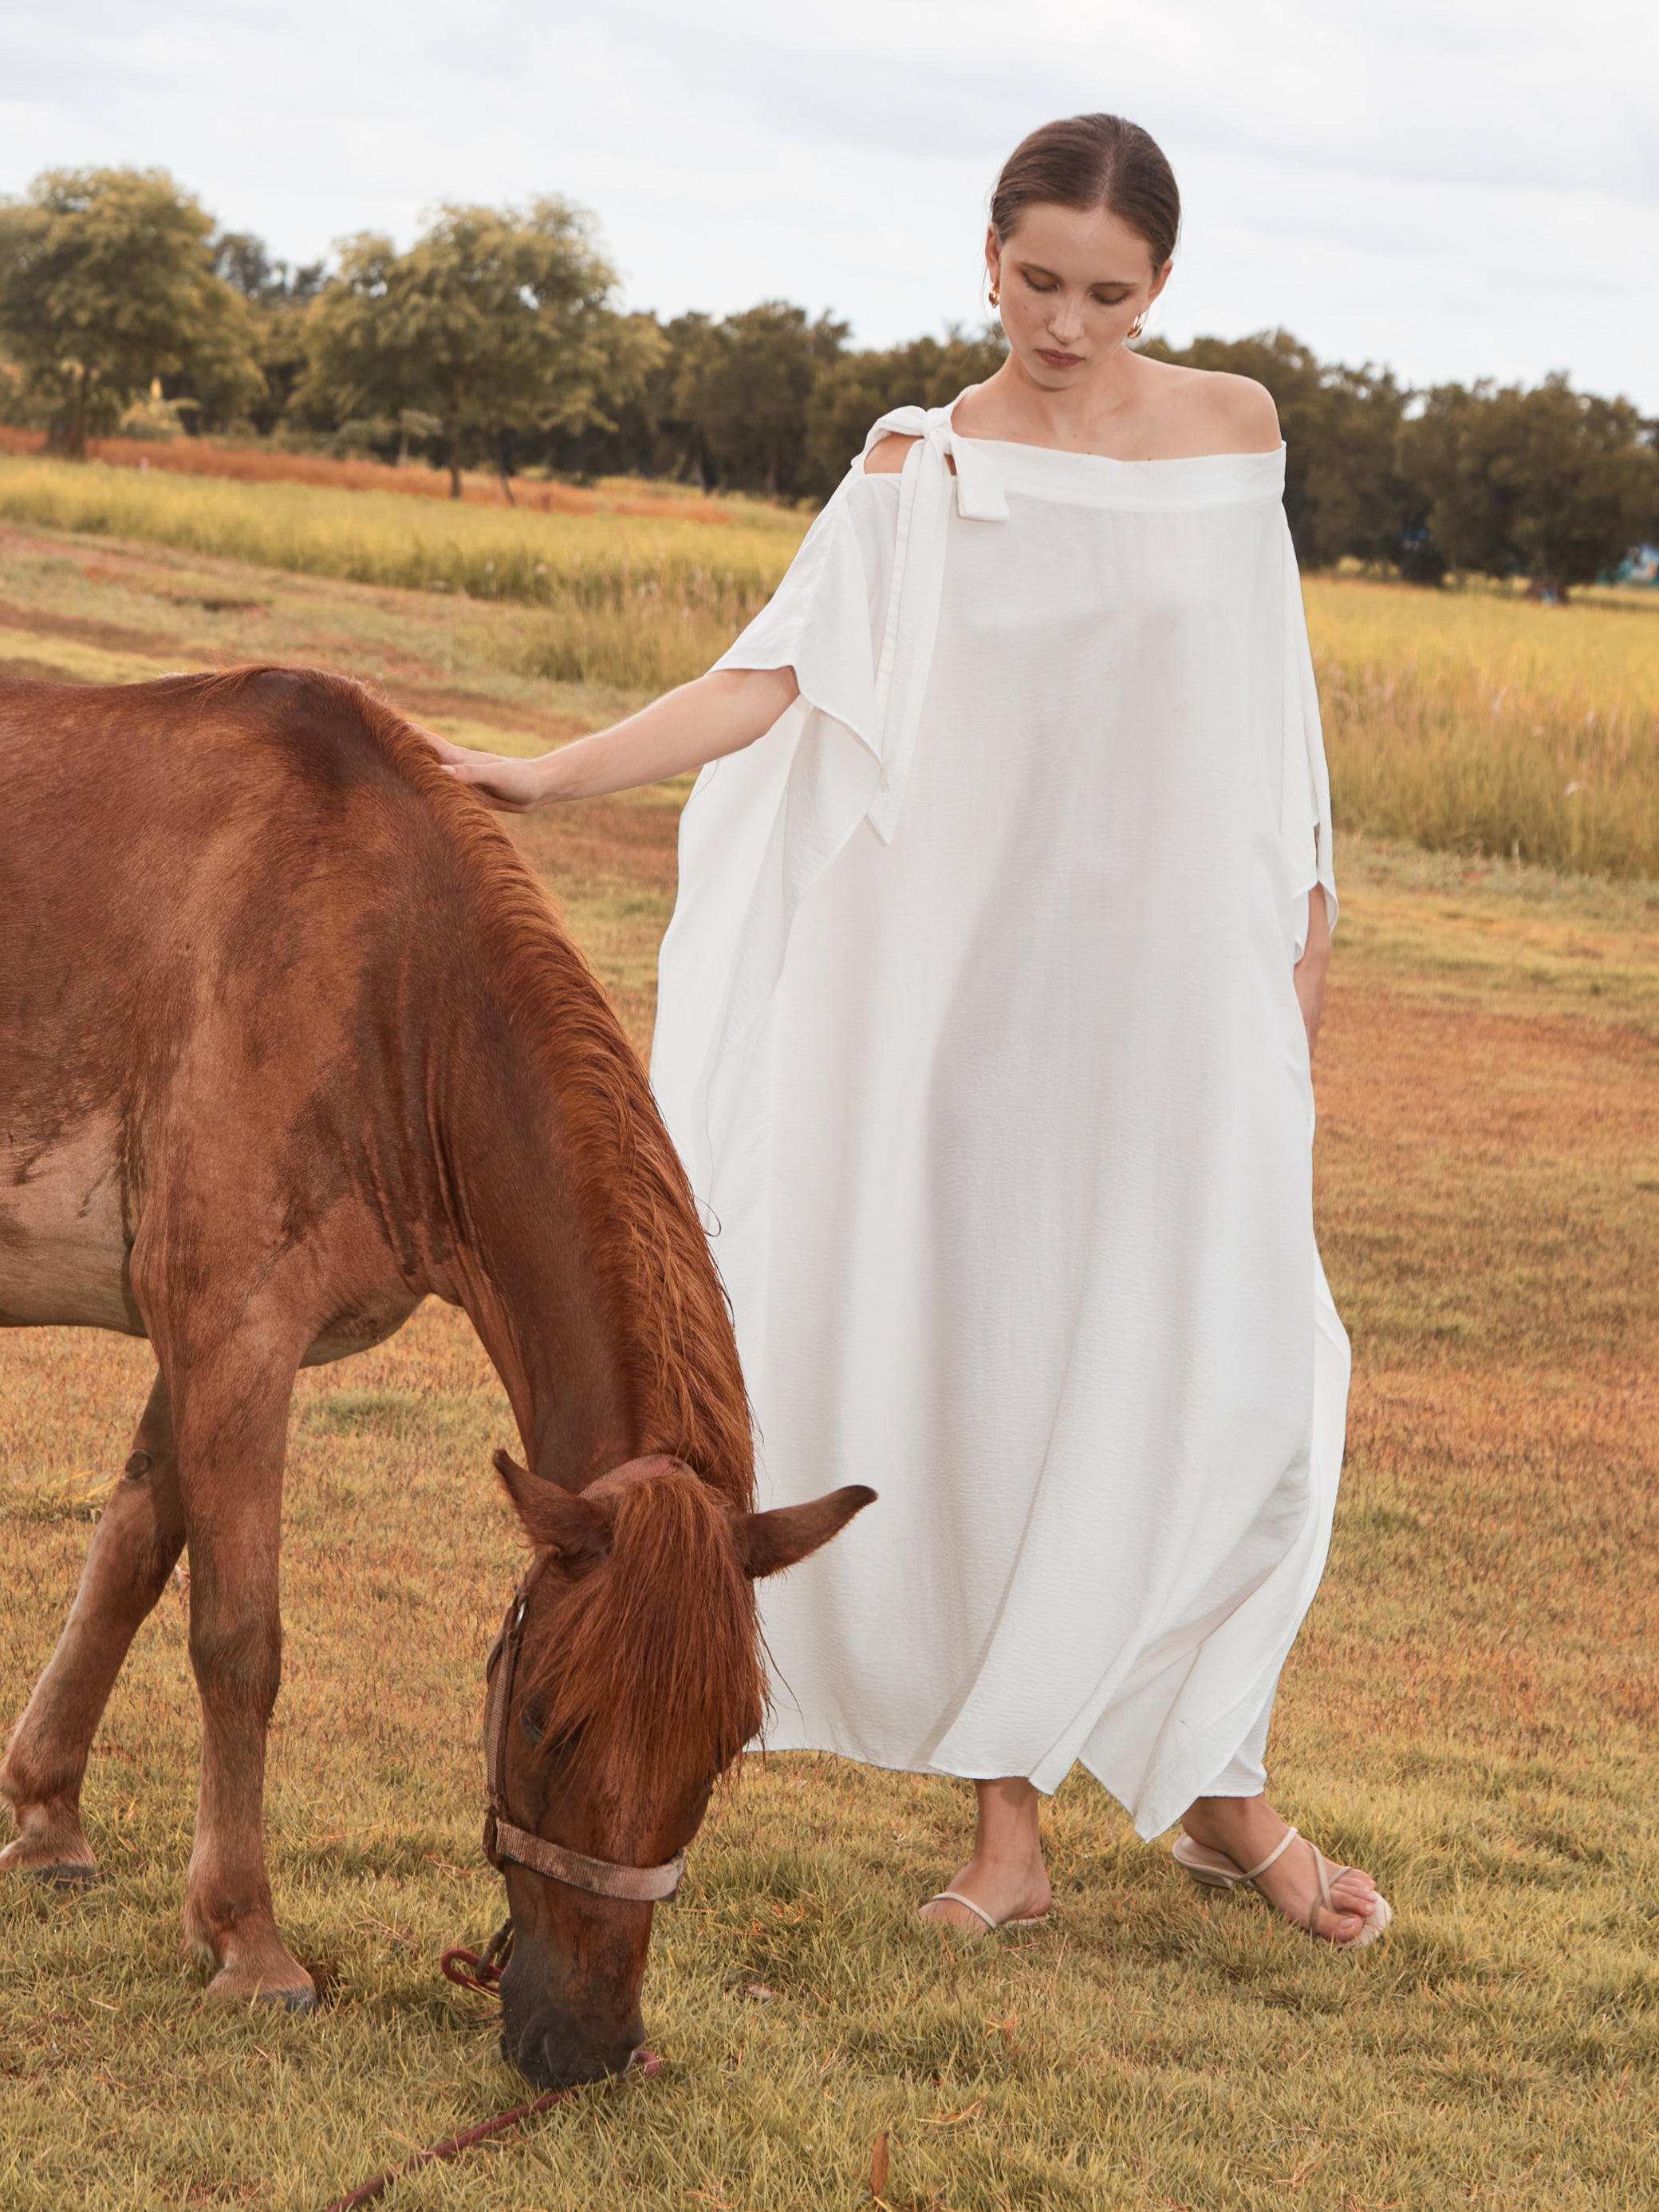 Shop White Kaftan Dress in limitless comfort and elegance with our Goddess Kaftan Maxi Dress. With a flowy skirt and a V neck, this modal maxi dress is the perfect vacation wear.